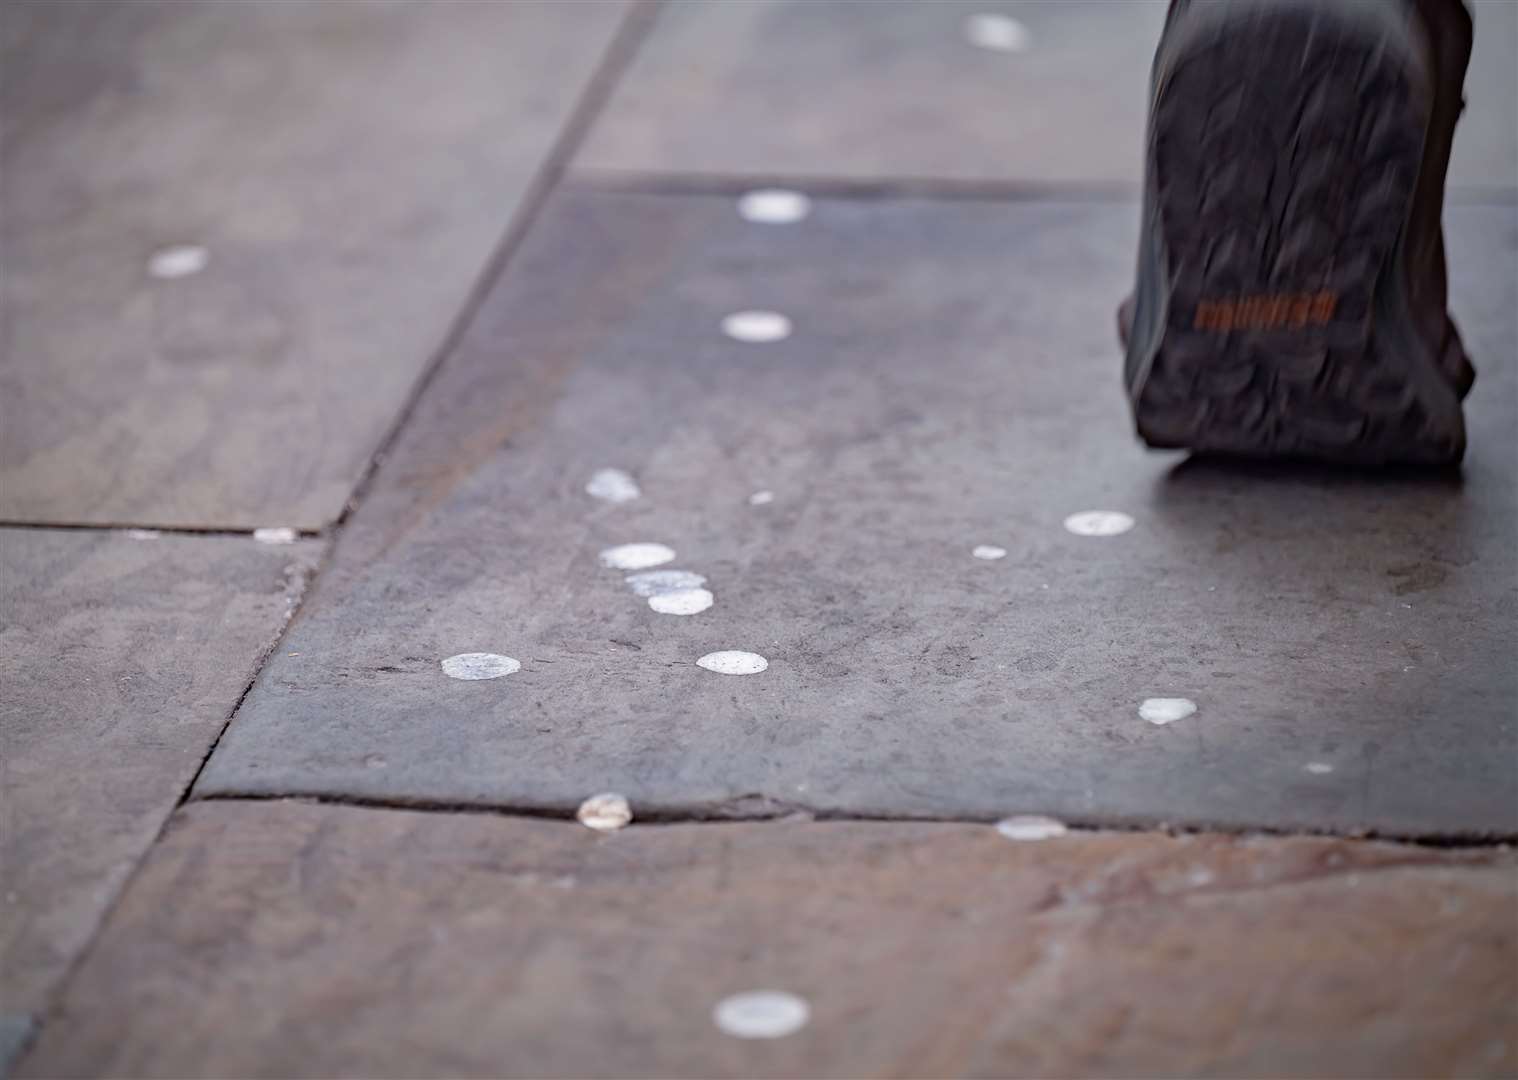 The grant will help fund the cleaning of pavements. Picture: Keep Britain Tidy